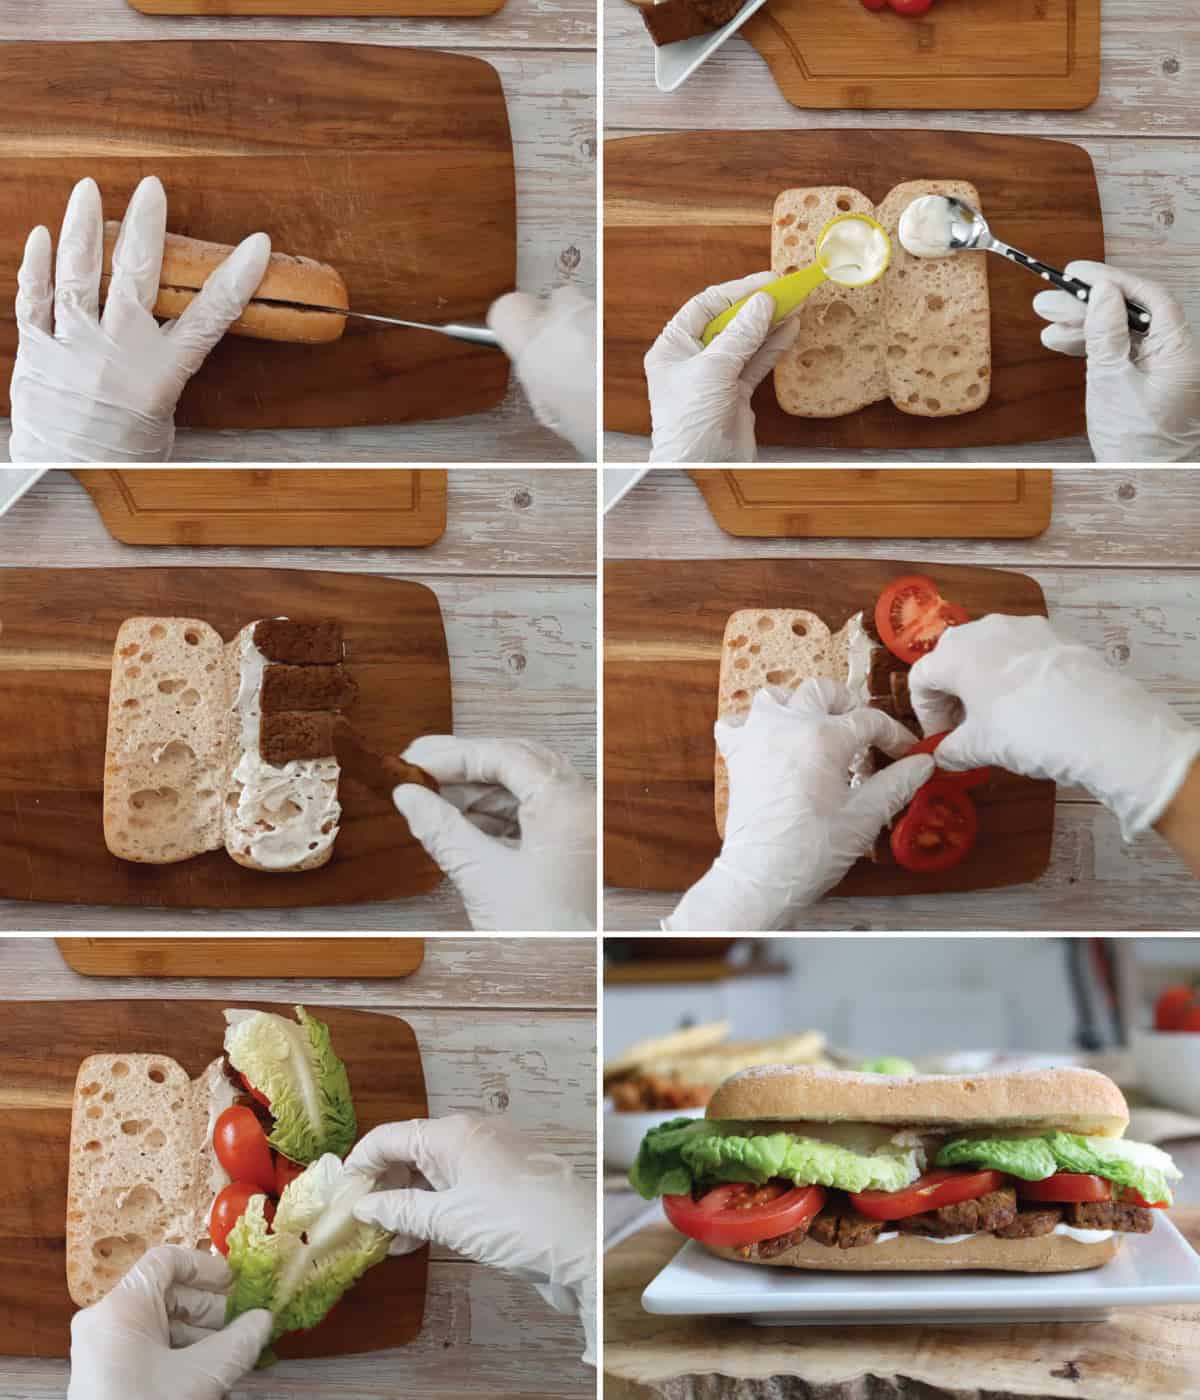 The process of Smoked Vegan Tempeh BLT Bacon Sandwich.